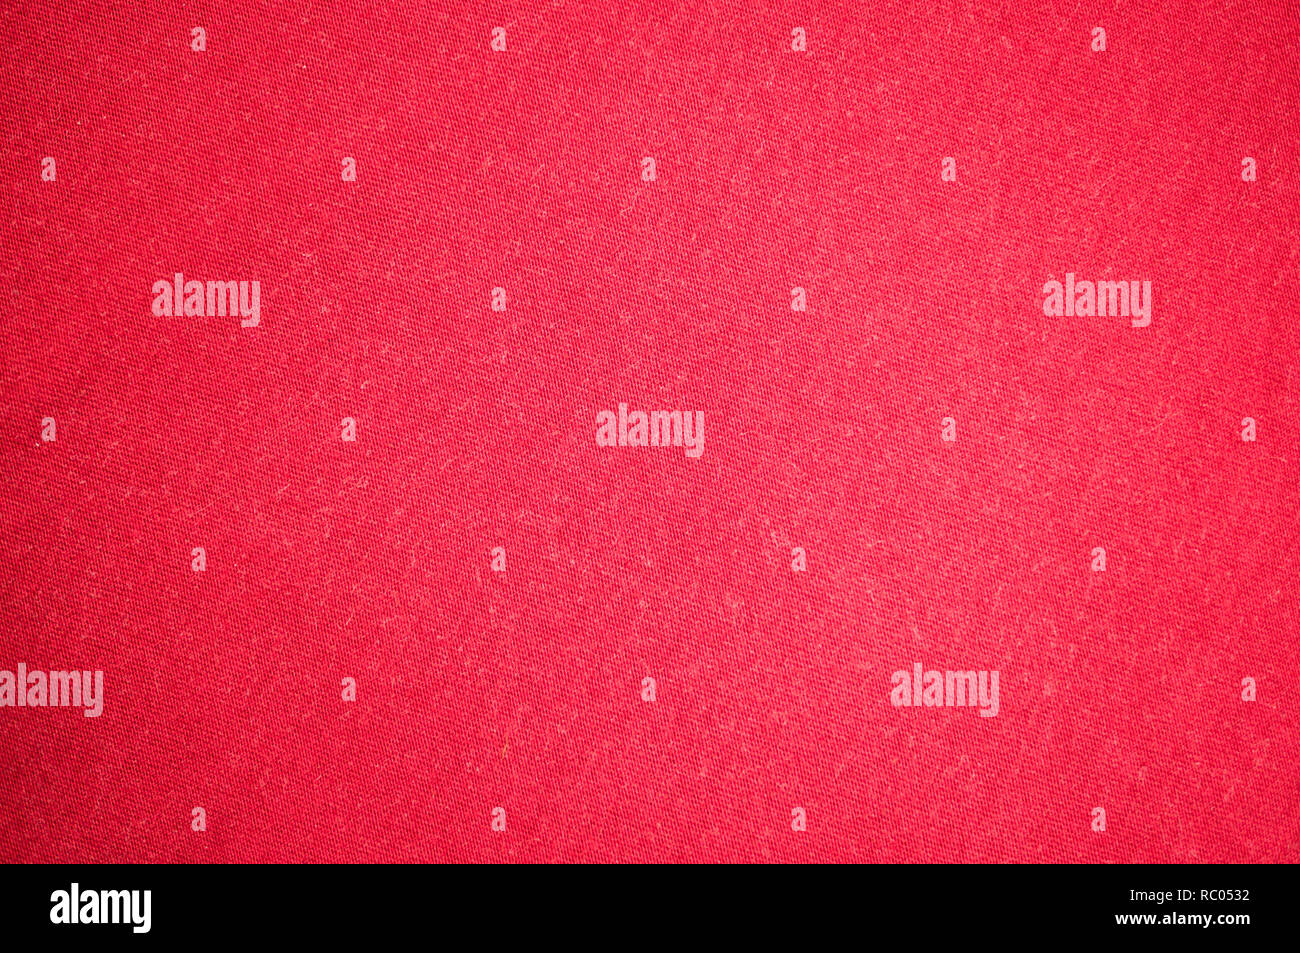 red rustic canvas fabric cloth texture. background, textile. Stock Photo